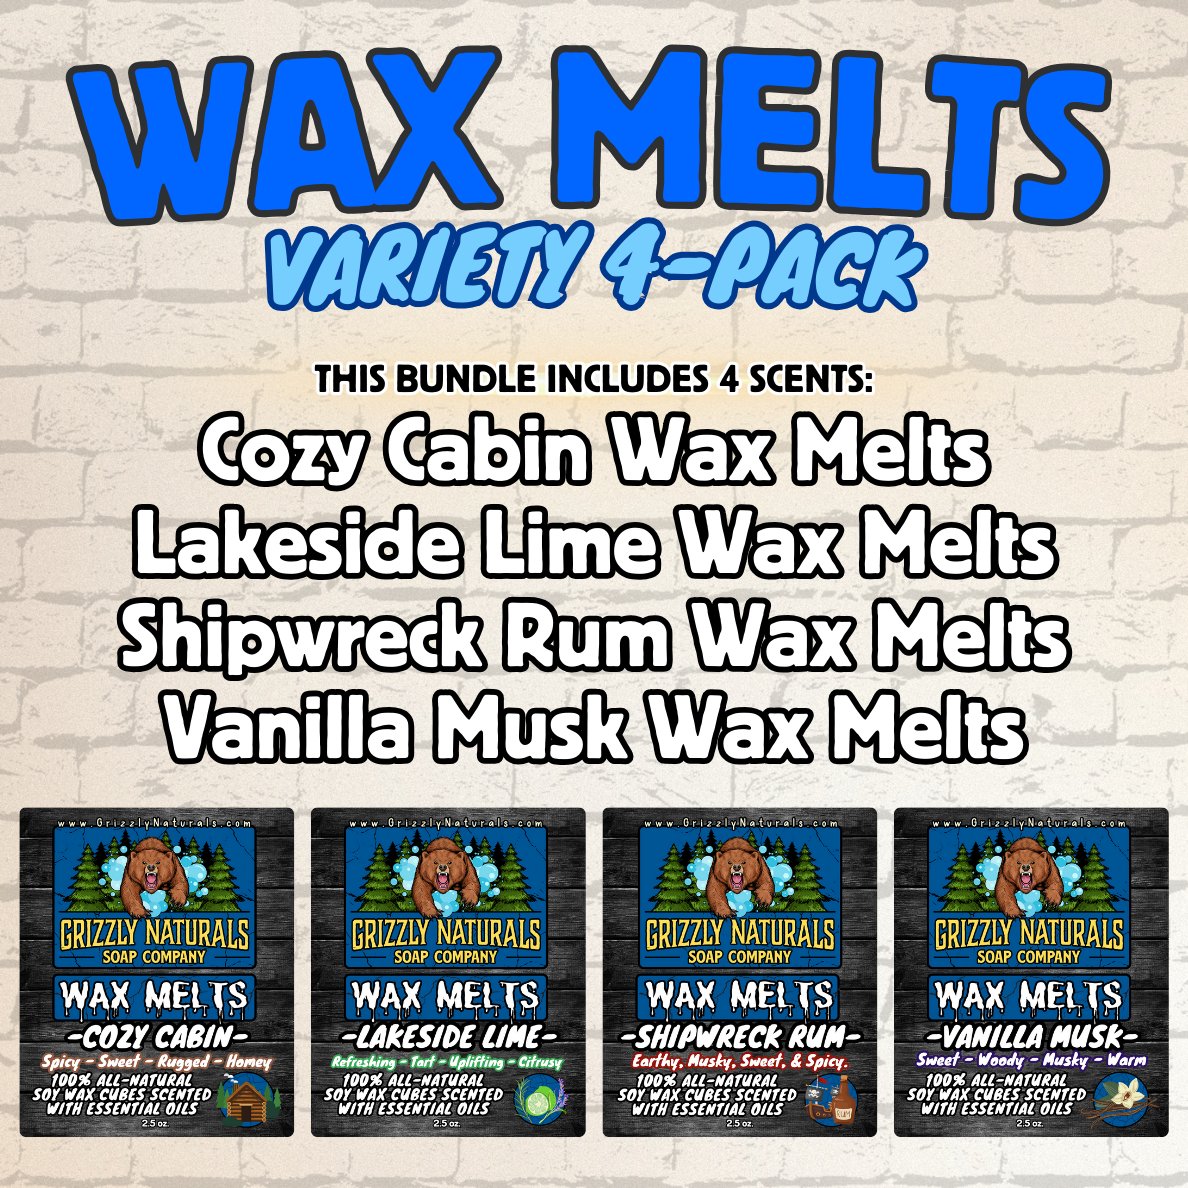 Wax Melts - Variety Bundle - Grizzly Naturals Soap Company